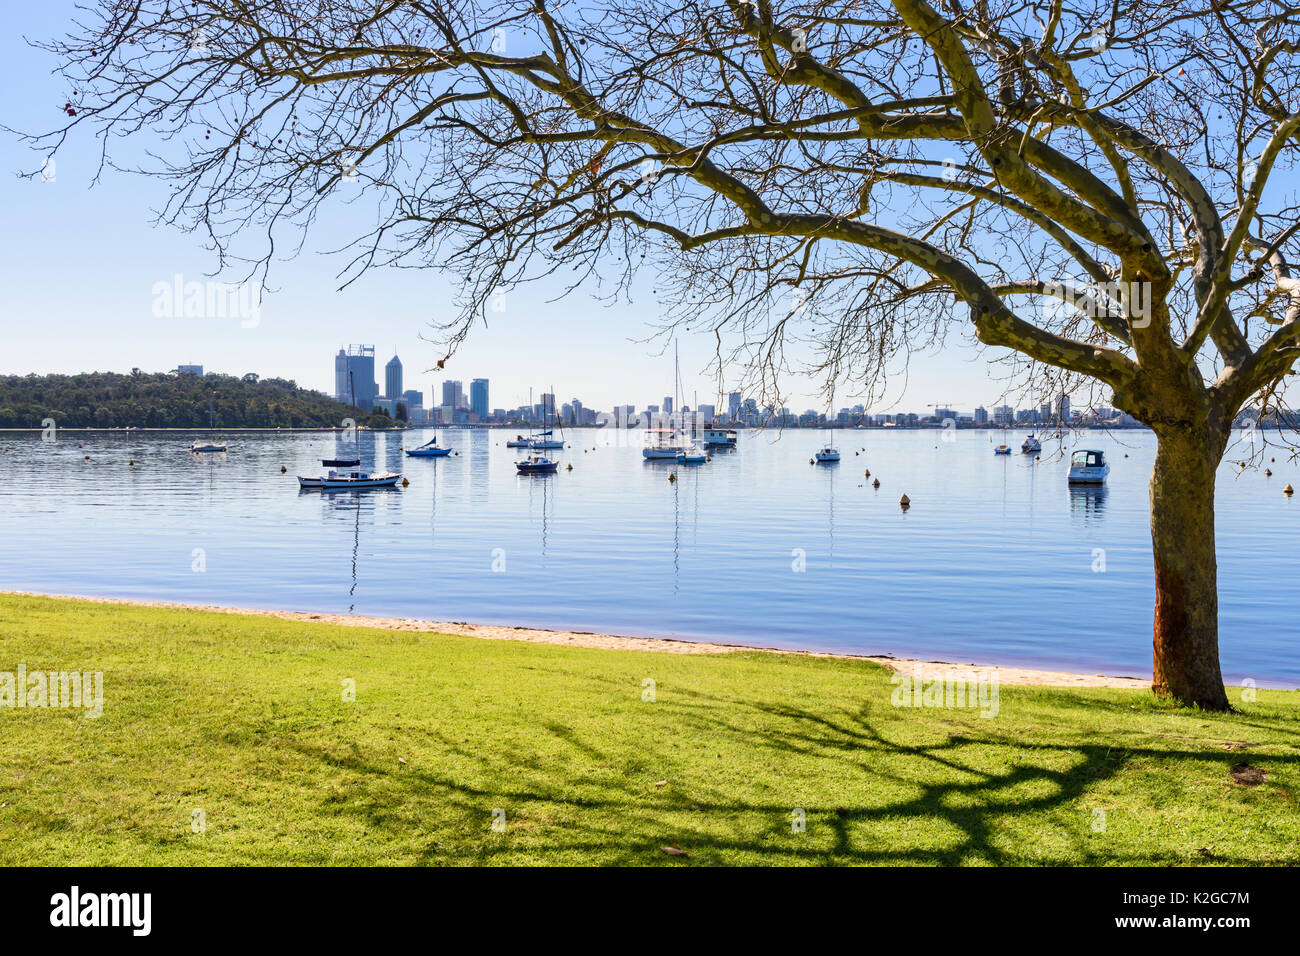 Tree framed view of boats in Matilda Bay on the Swan River at Crawley, Perth, Western Australia Stock Photo